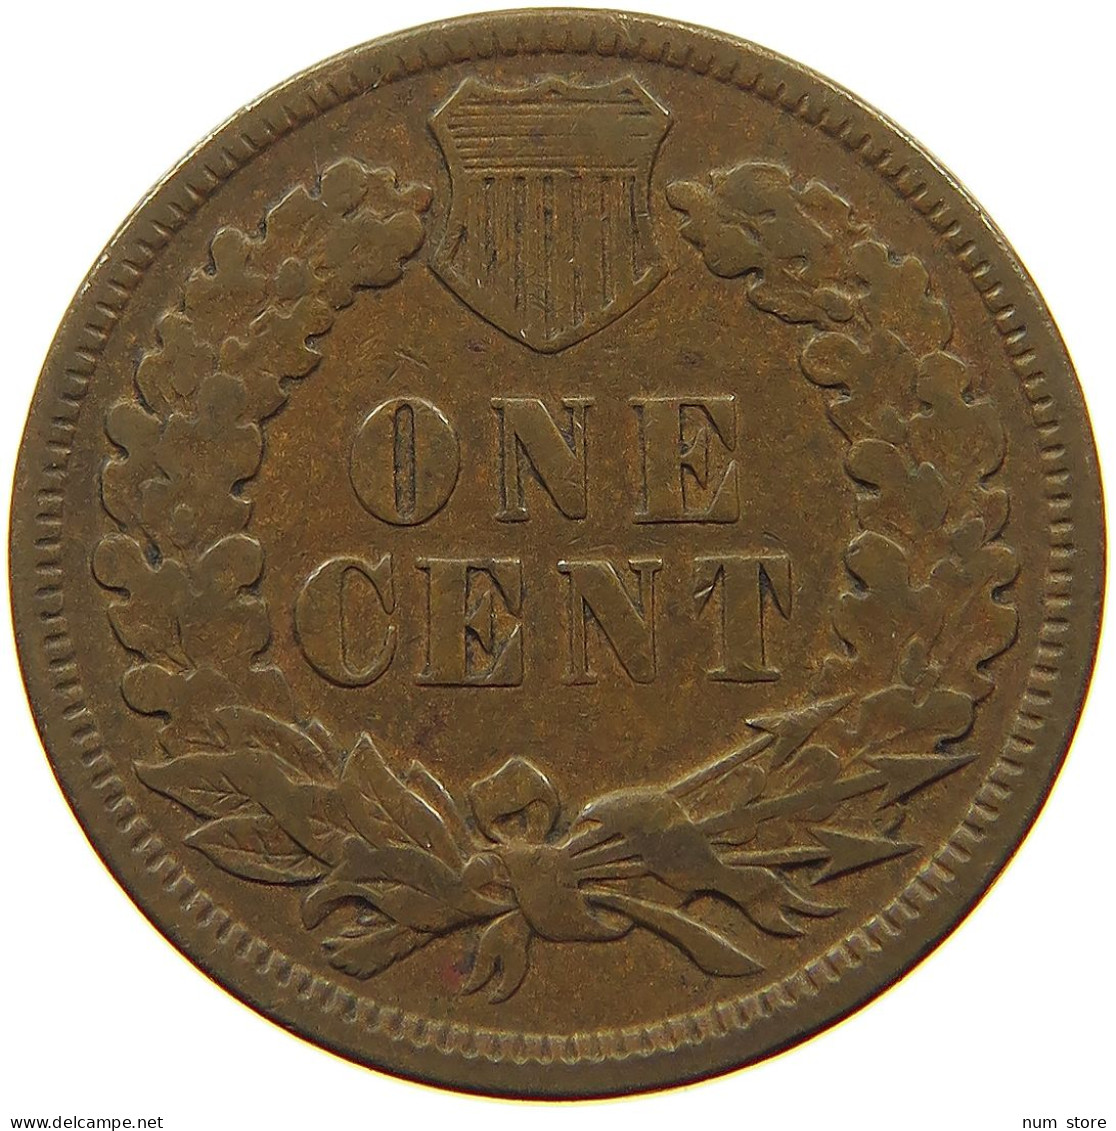 UNITED STATES OF AMERICA CENT 1896 INDIAN HEAD #s063 0037 - 1859-1909: Indian Head